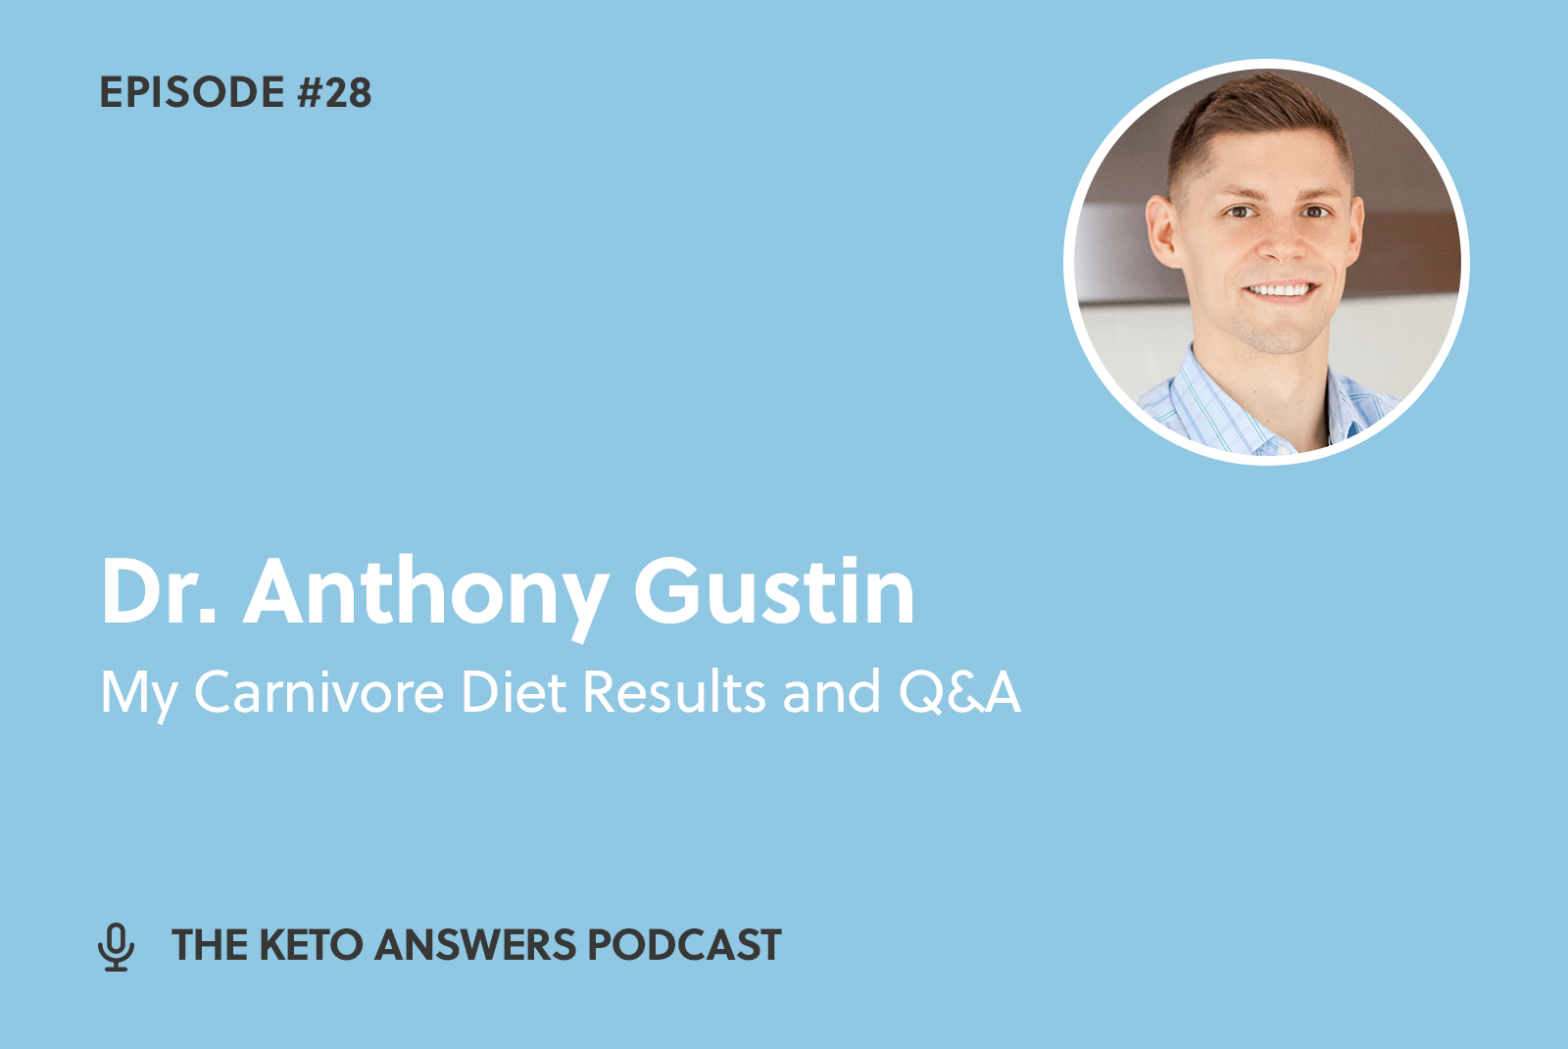 028: Dr. Anthony Gustin - My Carnivore Diet Results and Q&A